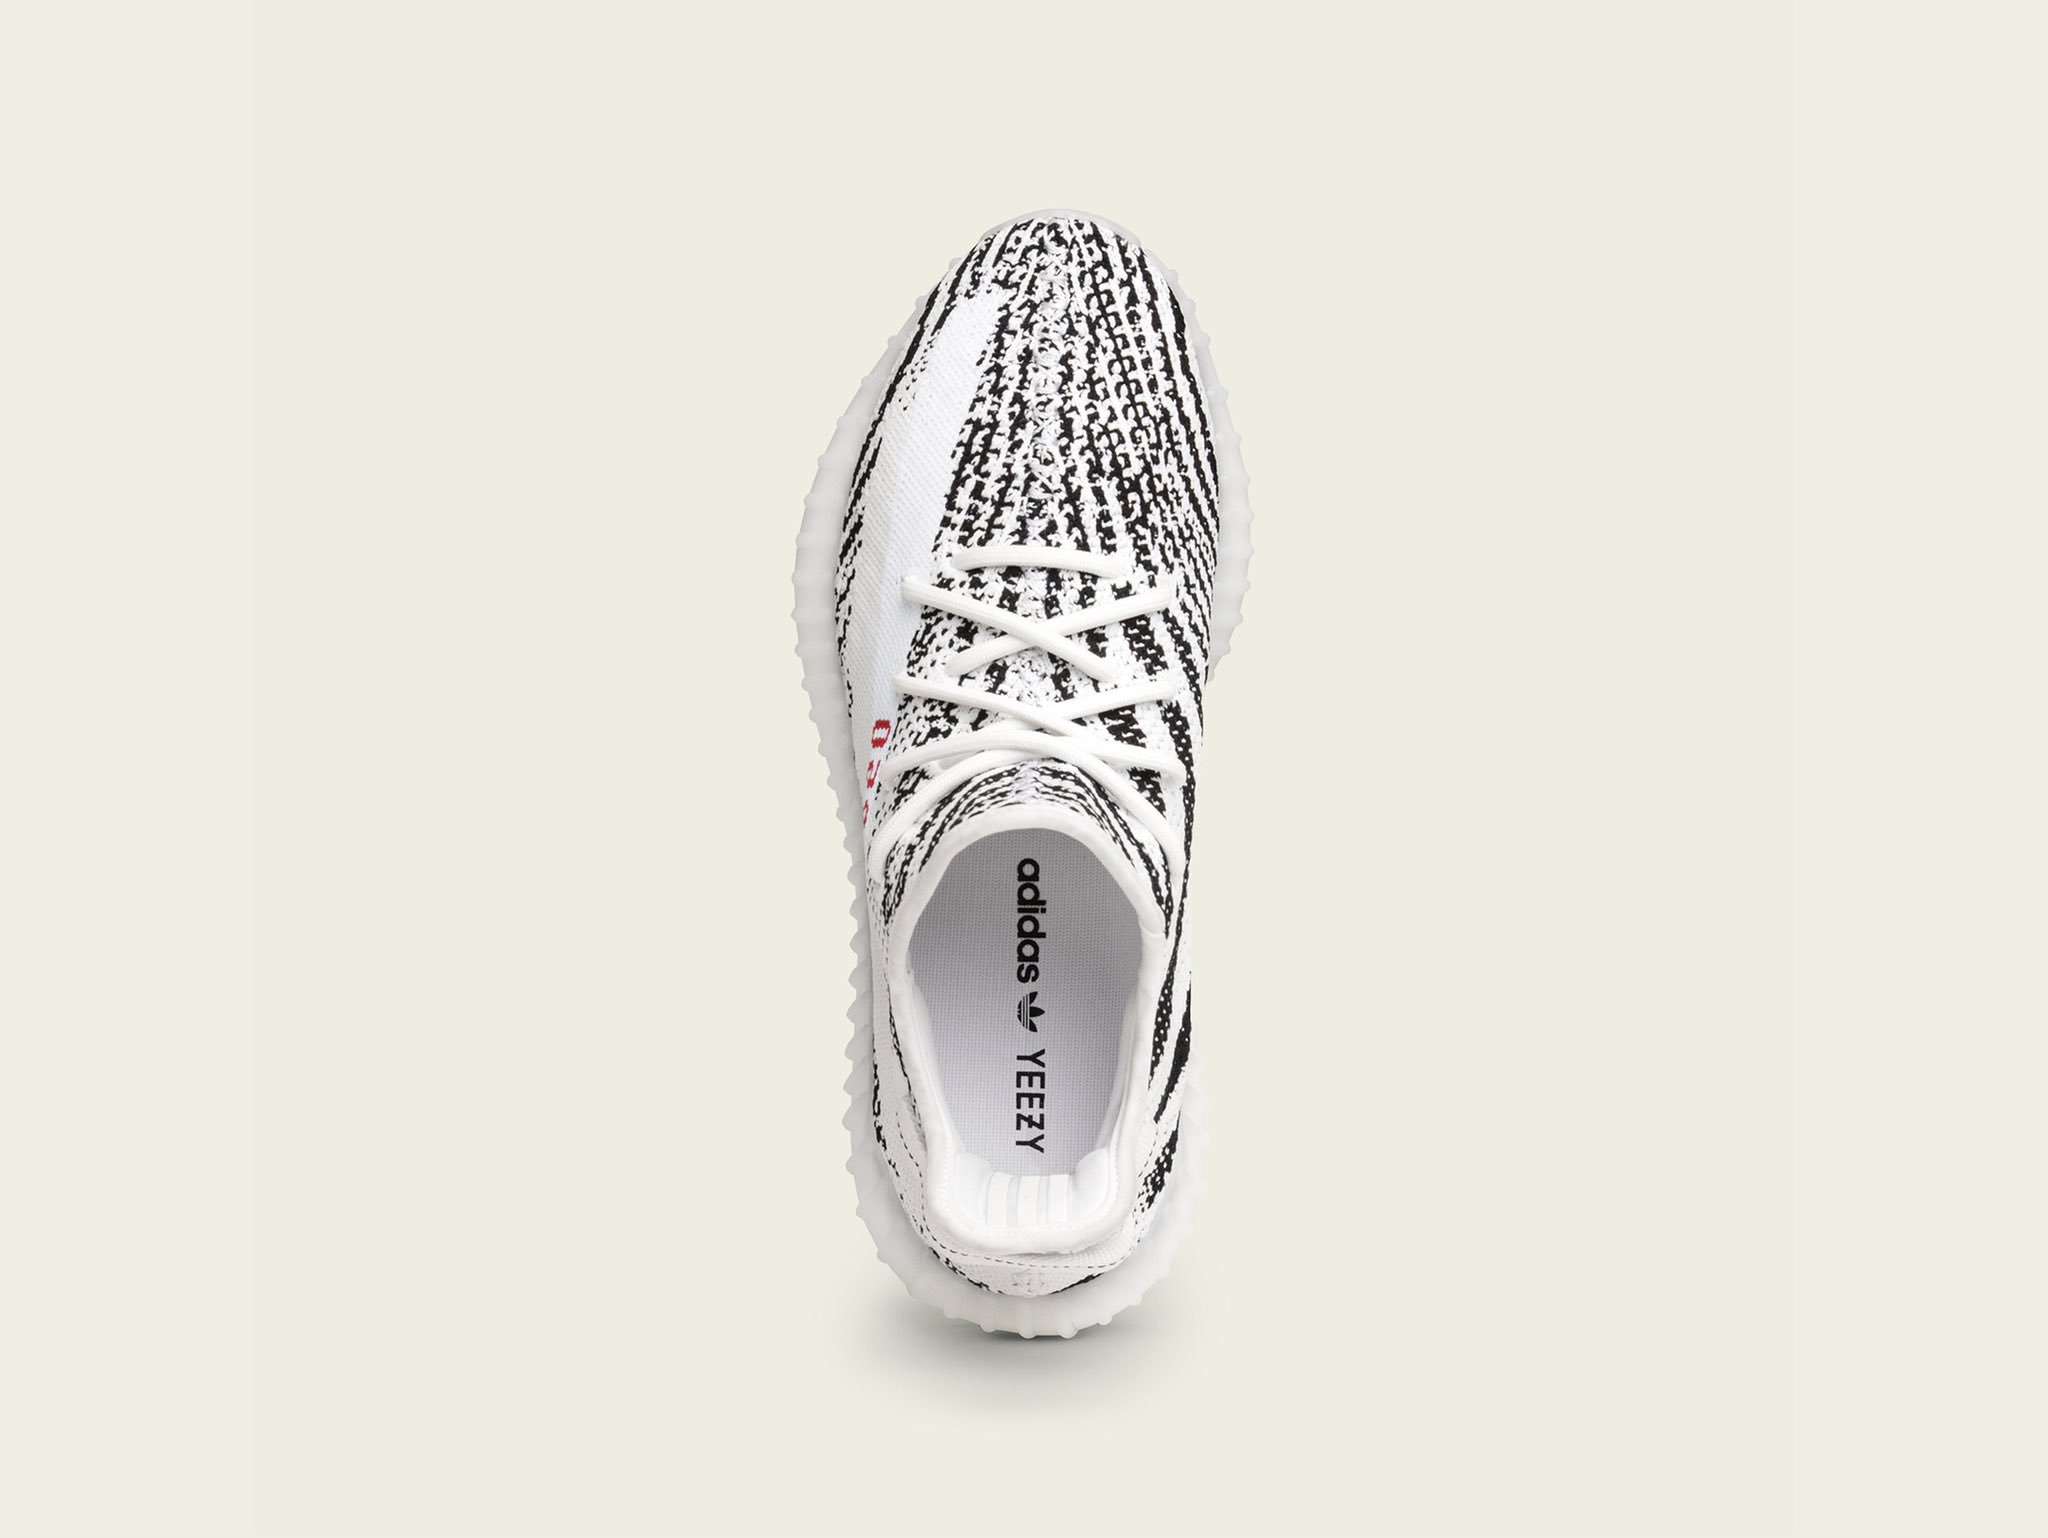 uberørt turnering lån Jimmy Jazz on Twitter: "The adidas YEEZY BOOST 350 V2 White/Core Black/Red  release this Fri 11/16⠀ Today 11/13- Raffle begins in select Jimmy Jazz  stores⠀ Tomorrow 11/14 – Raffles end at 2pm⠀